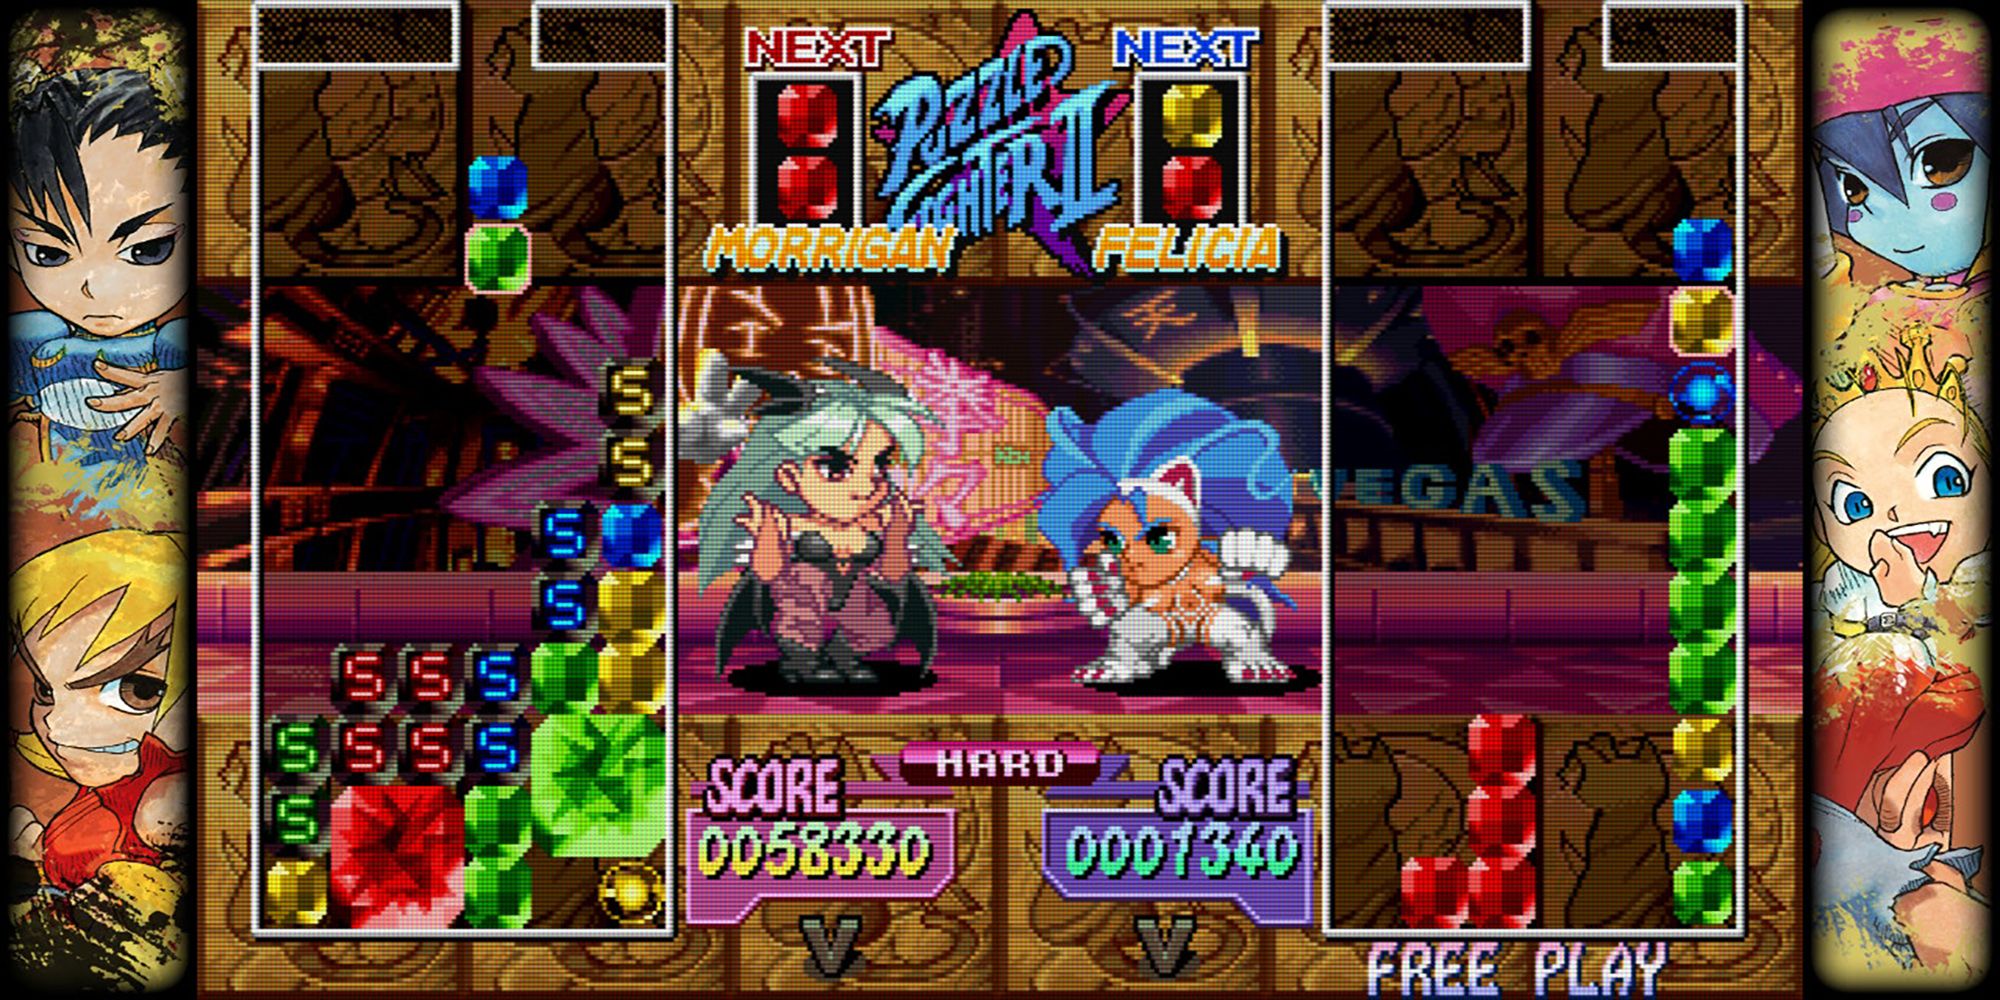 Morrigan uses Felicia's counter gems to build her own power gems during a Las Vegas showdown in Super Puzzle Fighter 2 Turbo, a game in Capcom Fighting Collection.